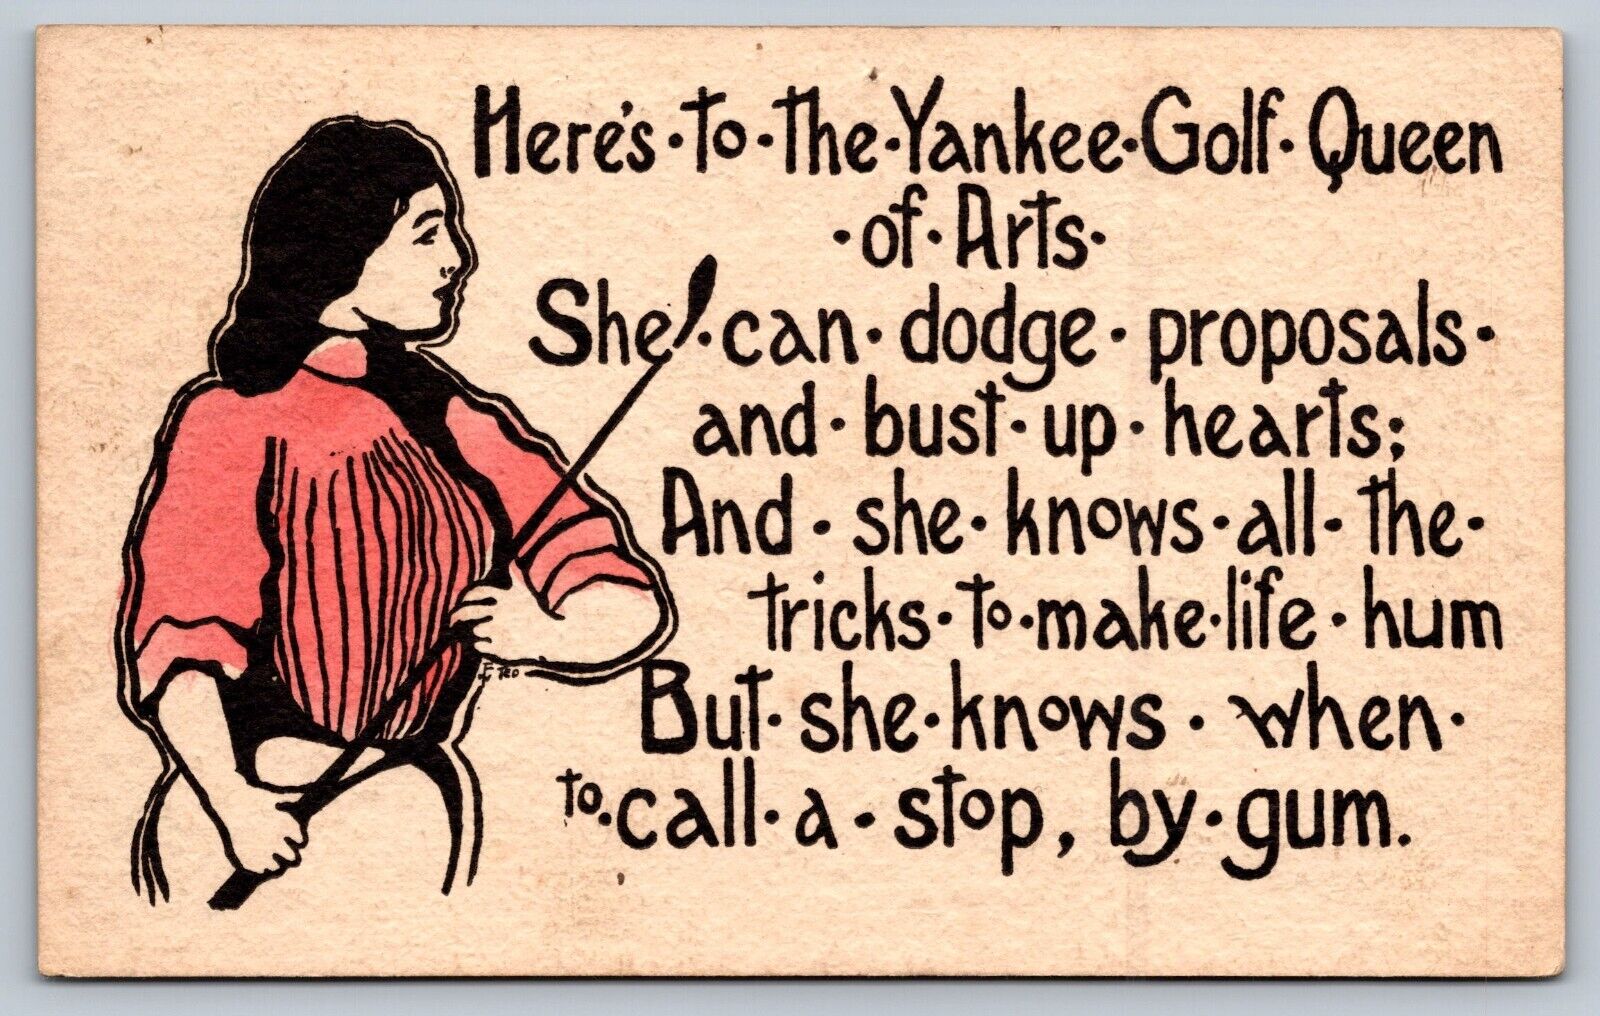 1909 postcard HERES TO THE YANKEE GOLF QUEEN OF ARTS woman golfer